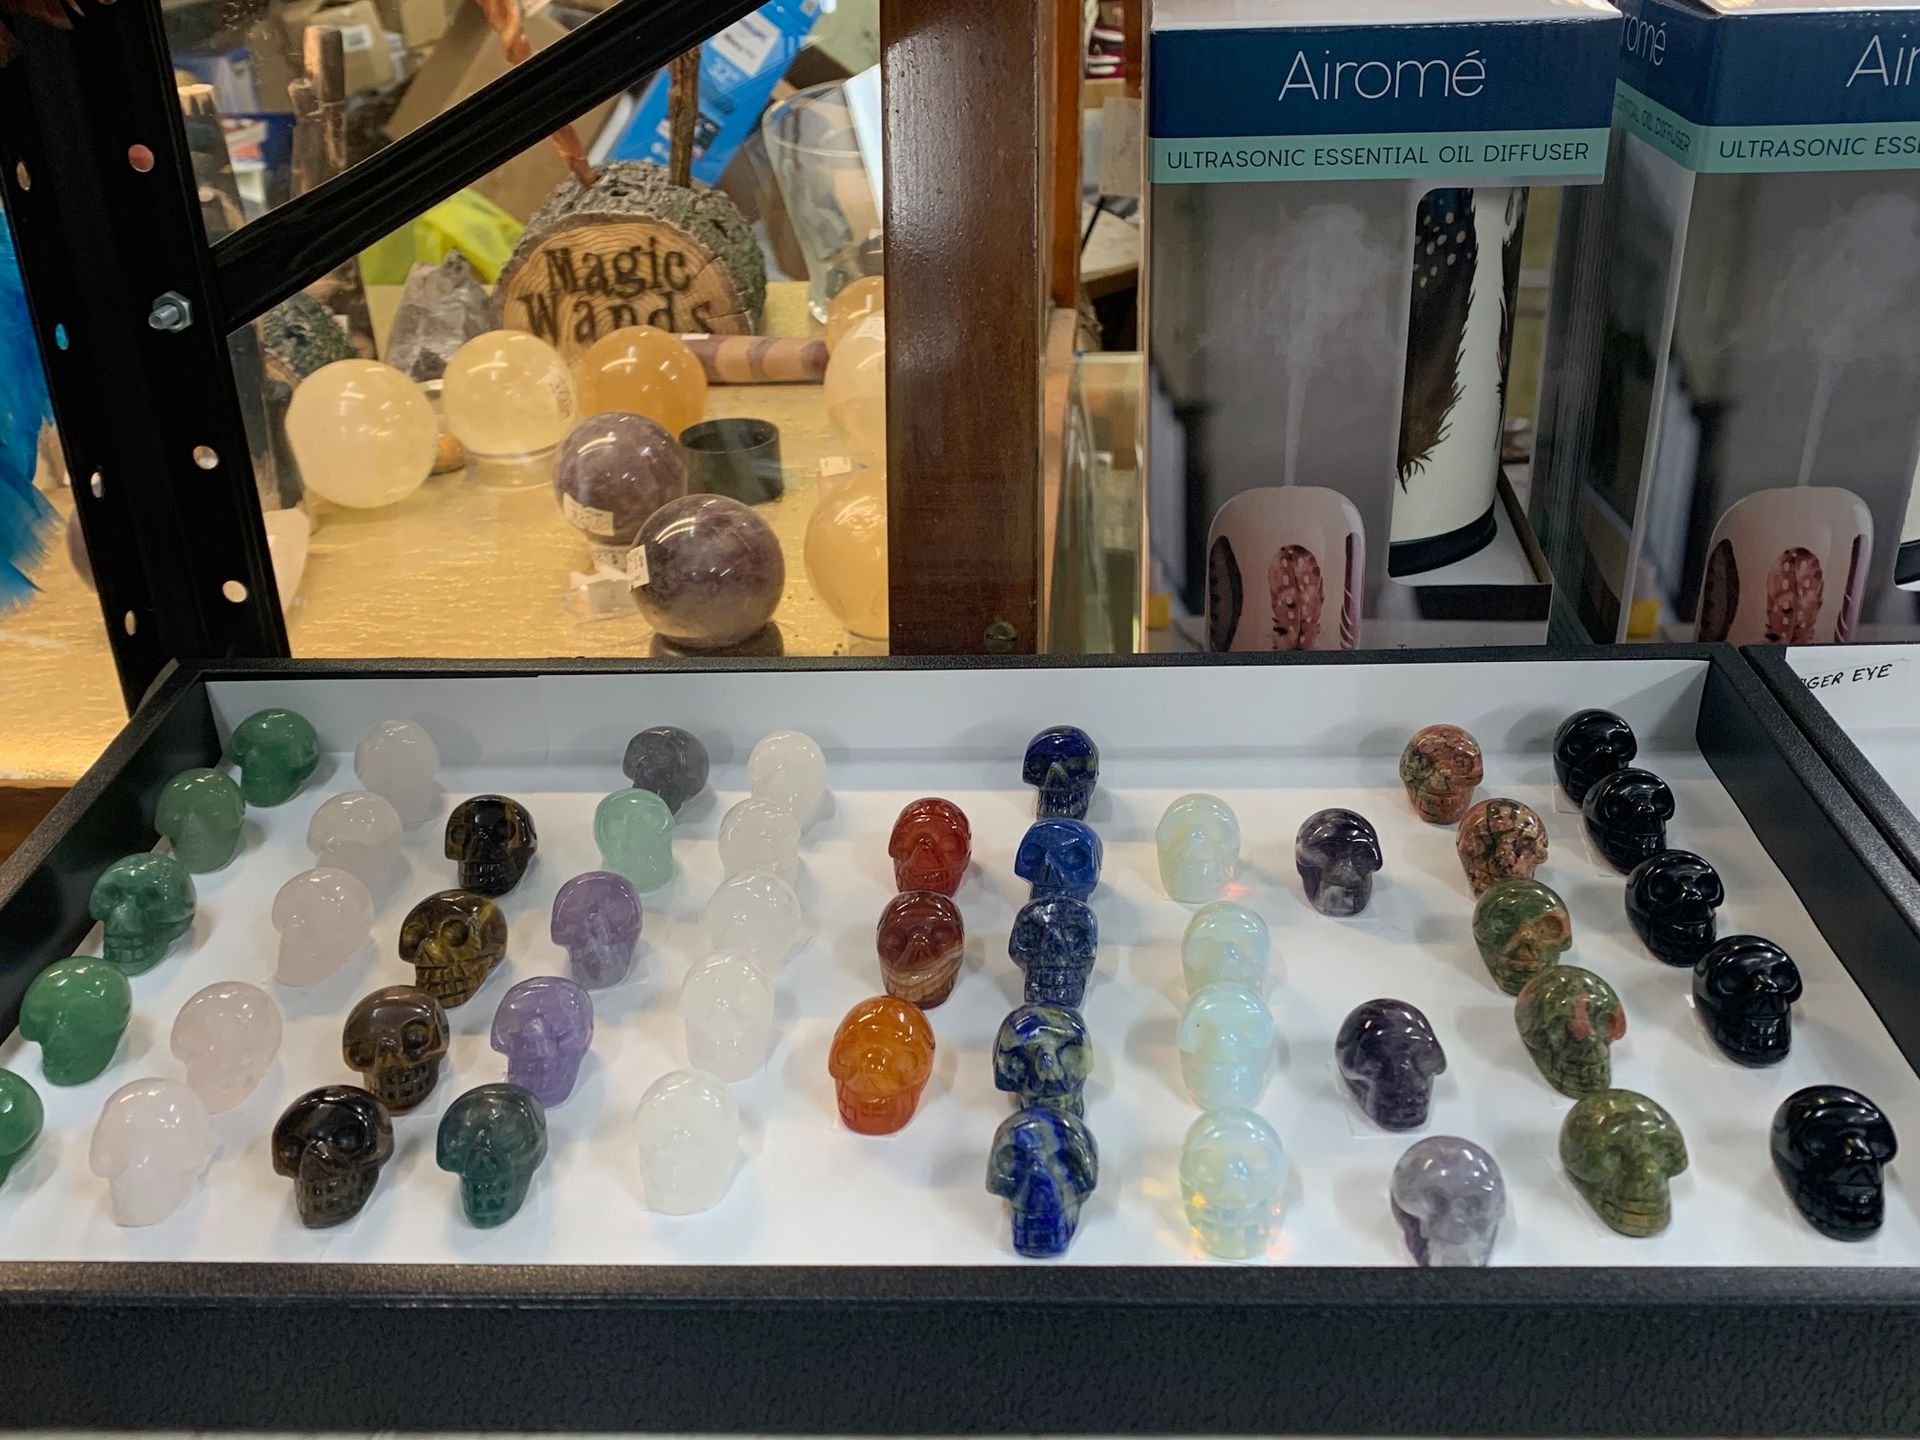 A variety of crystal skulls are on display in a store.